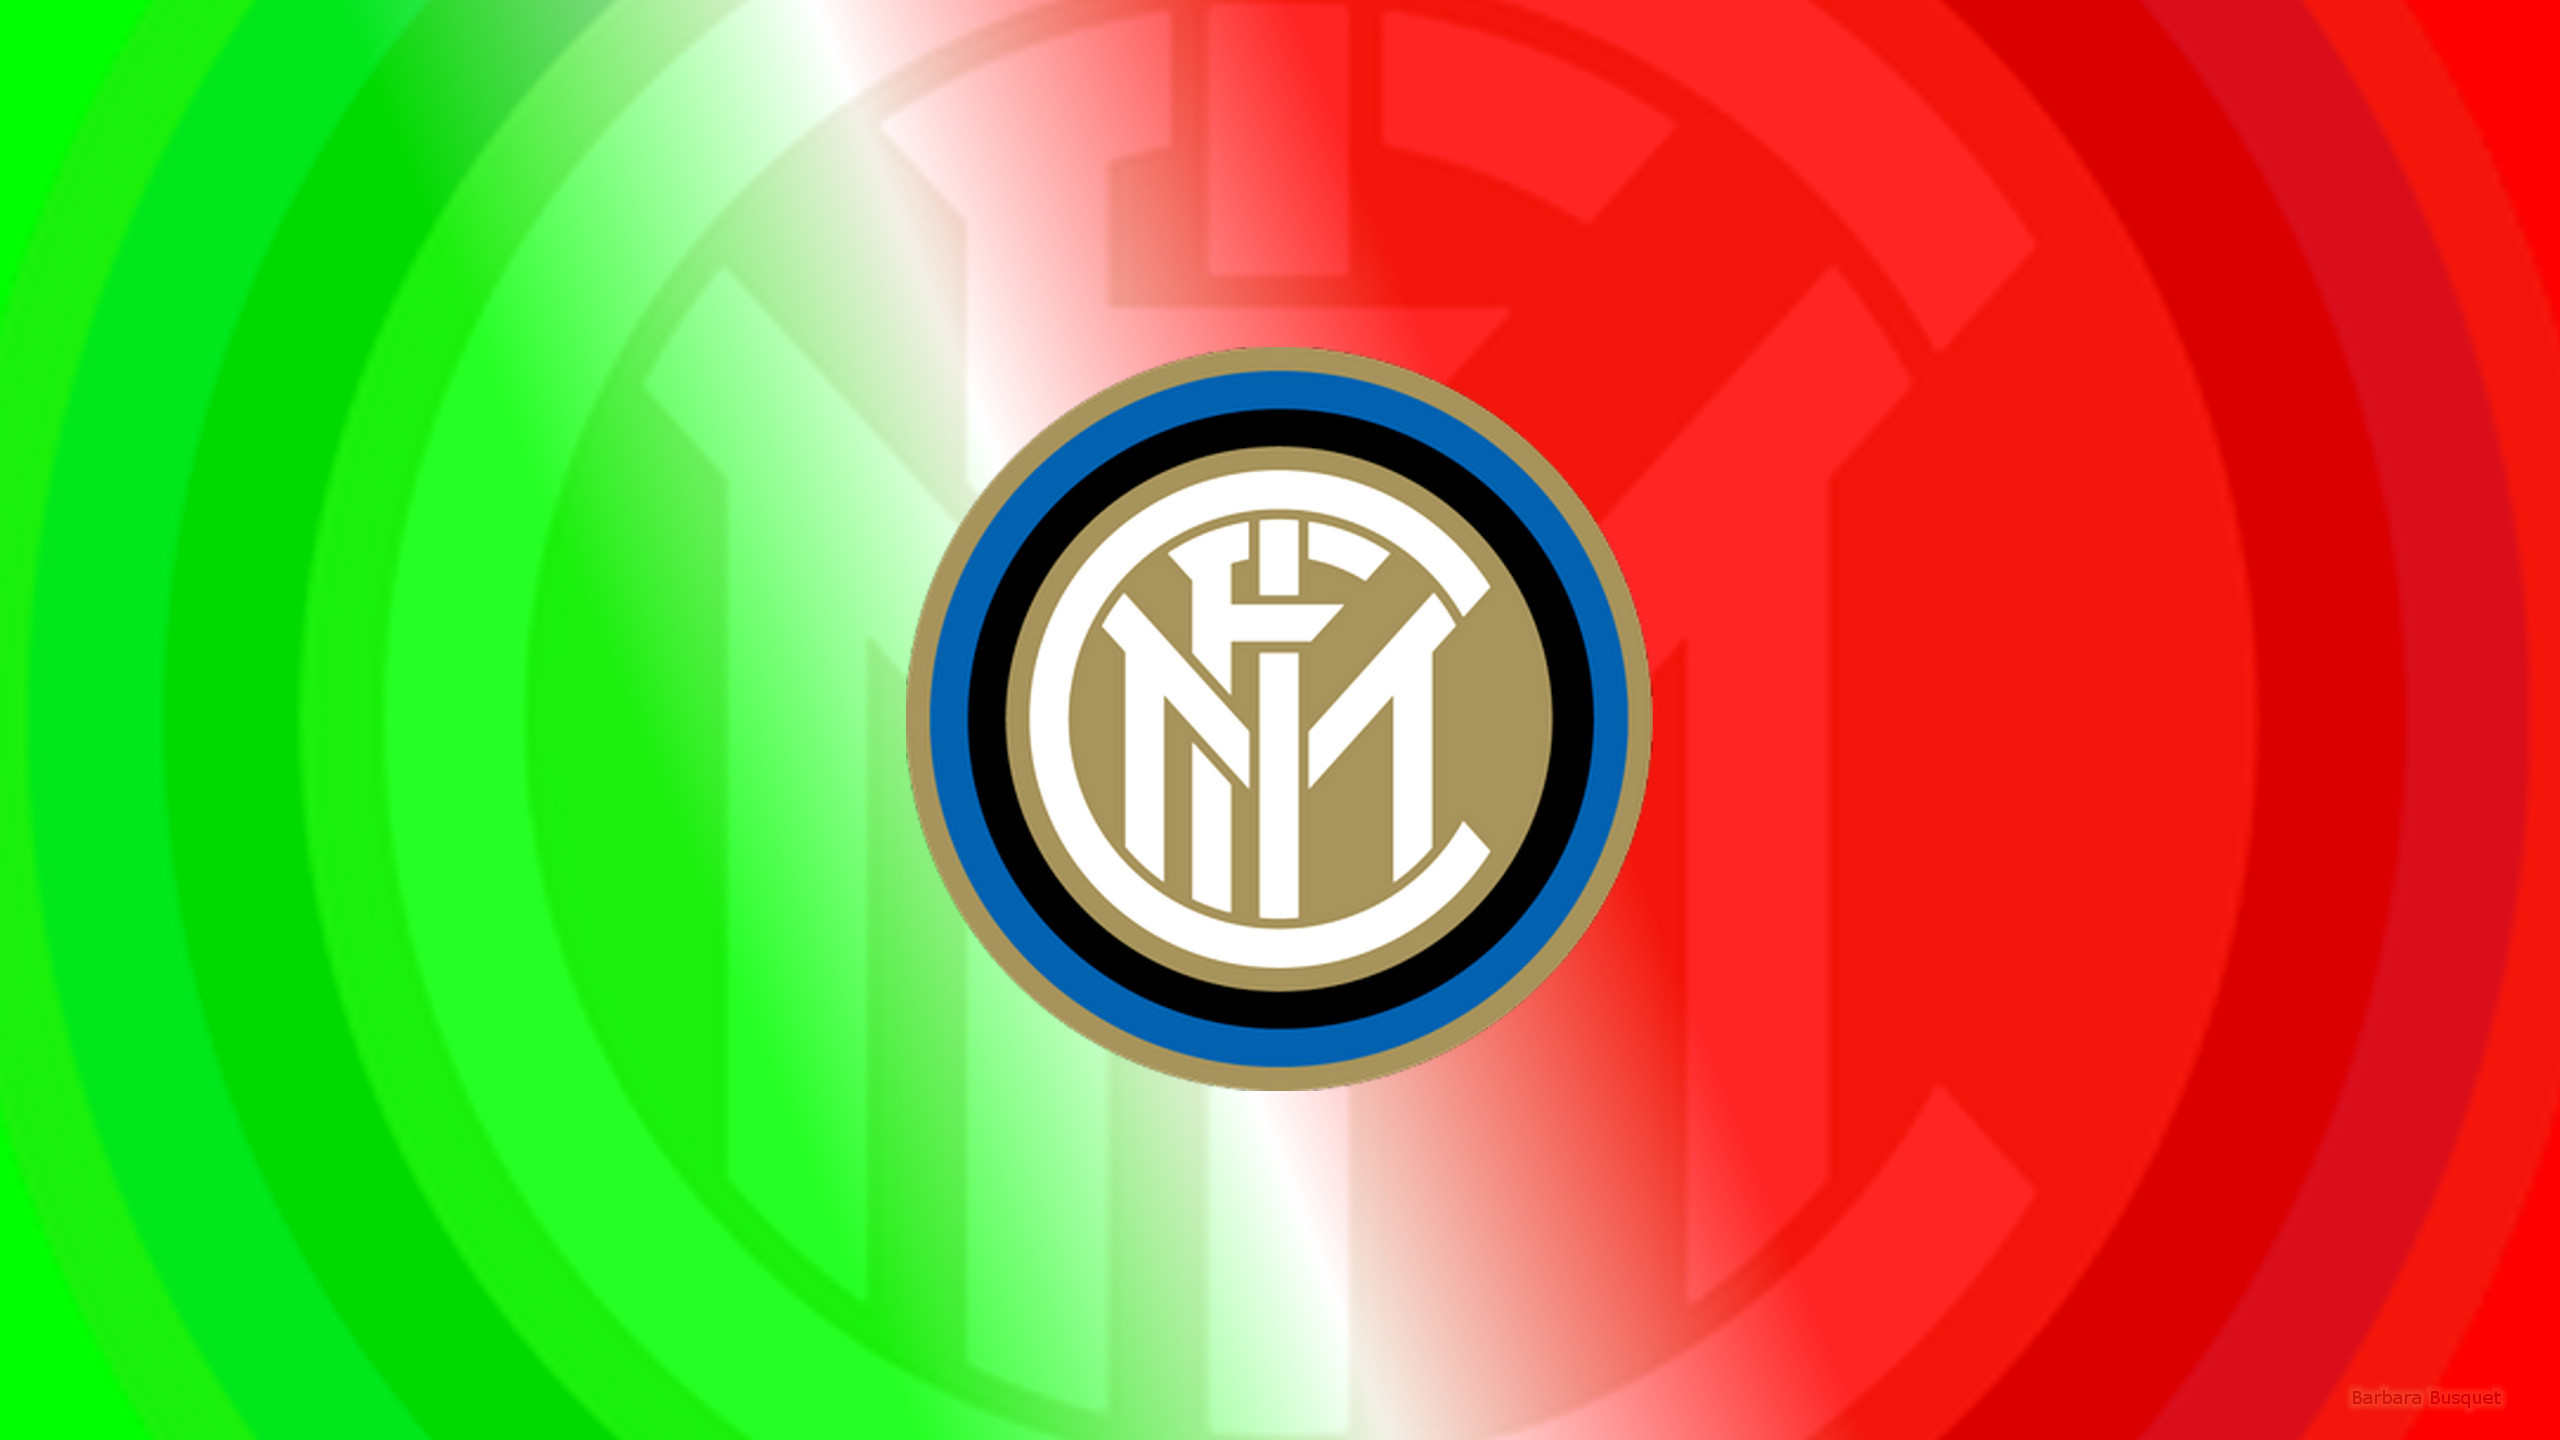 2560x1440 Italy Flag Wallpaper - Android Apps on Google Play Ac Milan Wallpaper A  Italian Wallpapers Group (73 ) ...